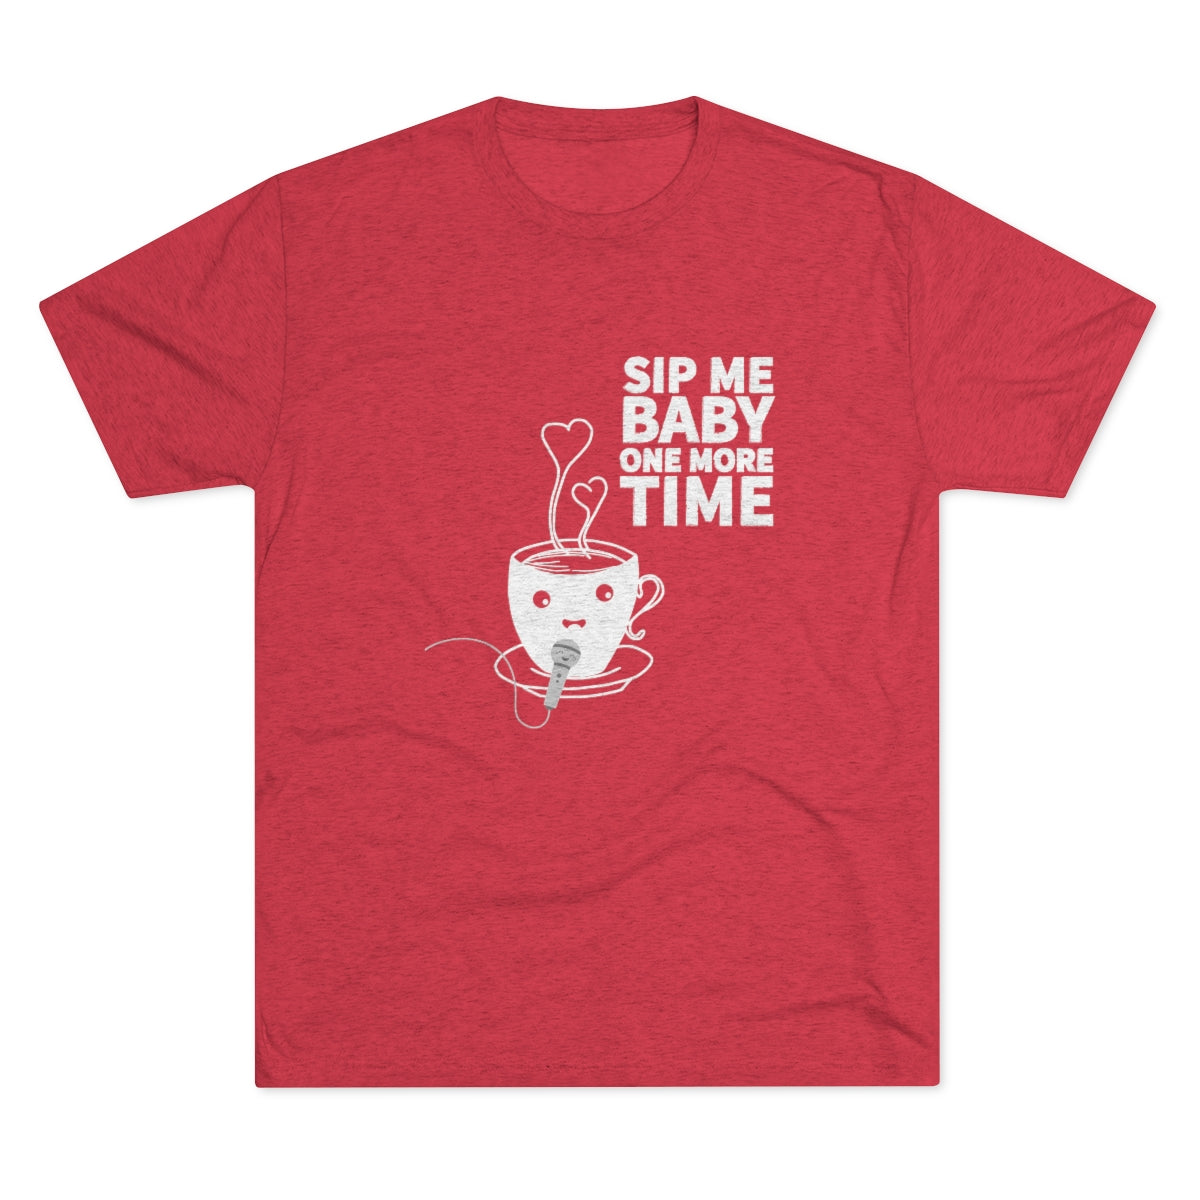 Sip Me Baby Graphic Tee - Tri-Blend Vintage Red L - Harney & Sons Fine Teas